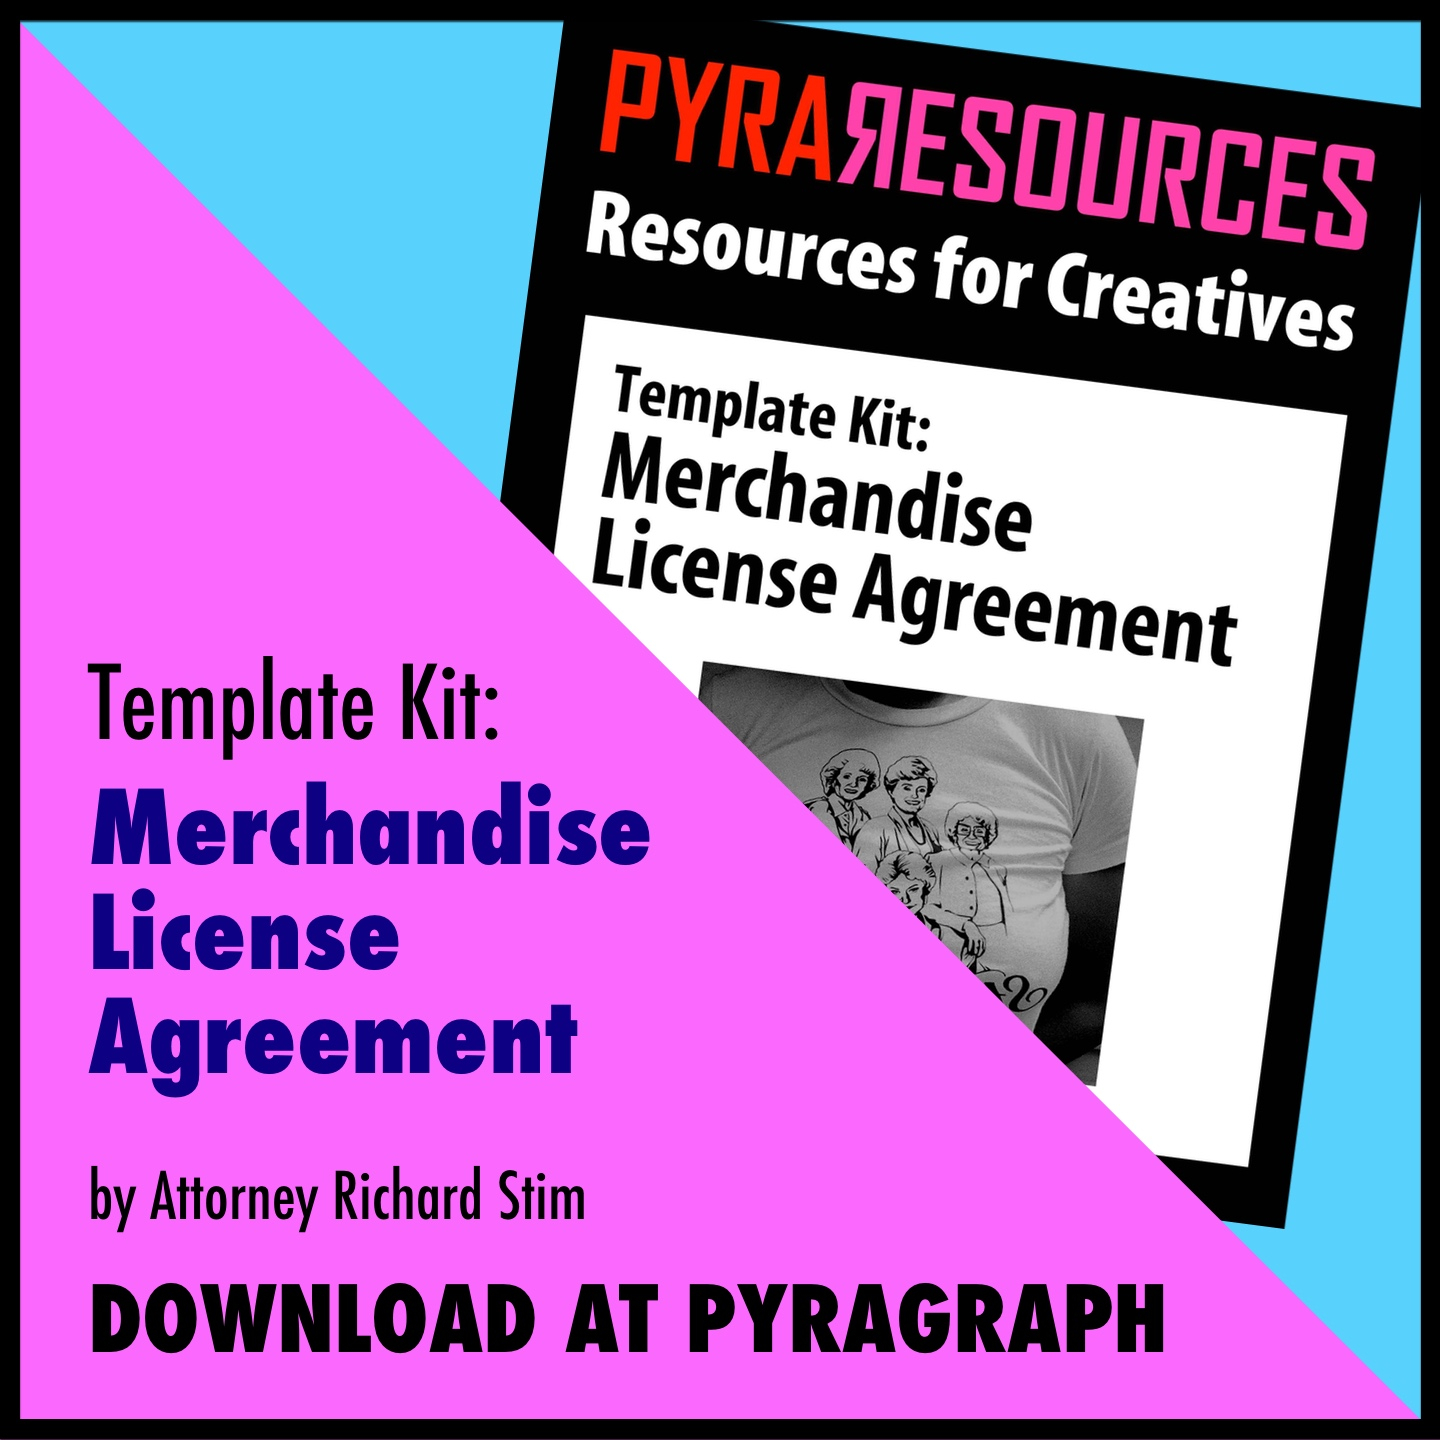 Licensing Agreement Term Sheet Merchandise License Agreement Template Kit Pyragraph